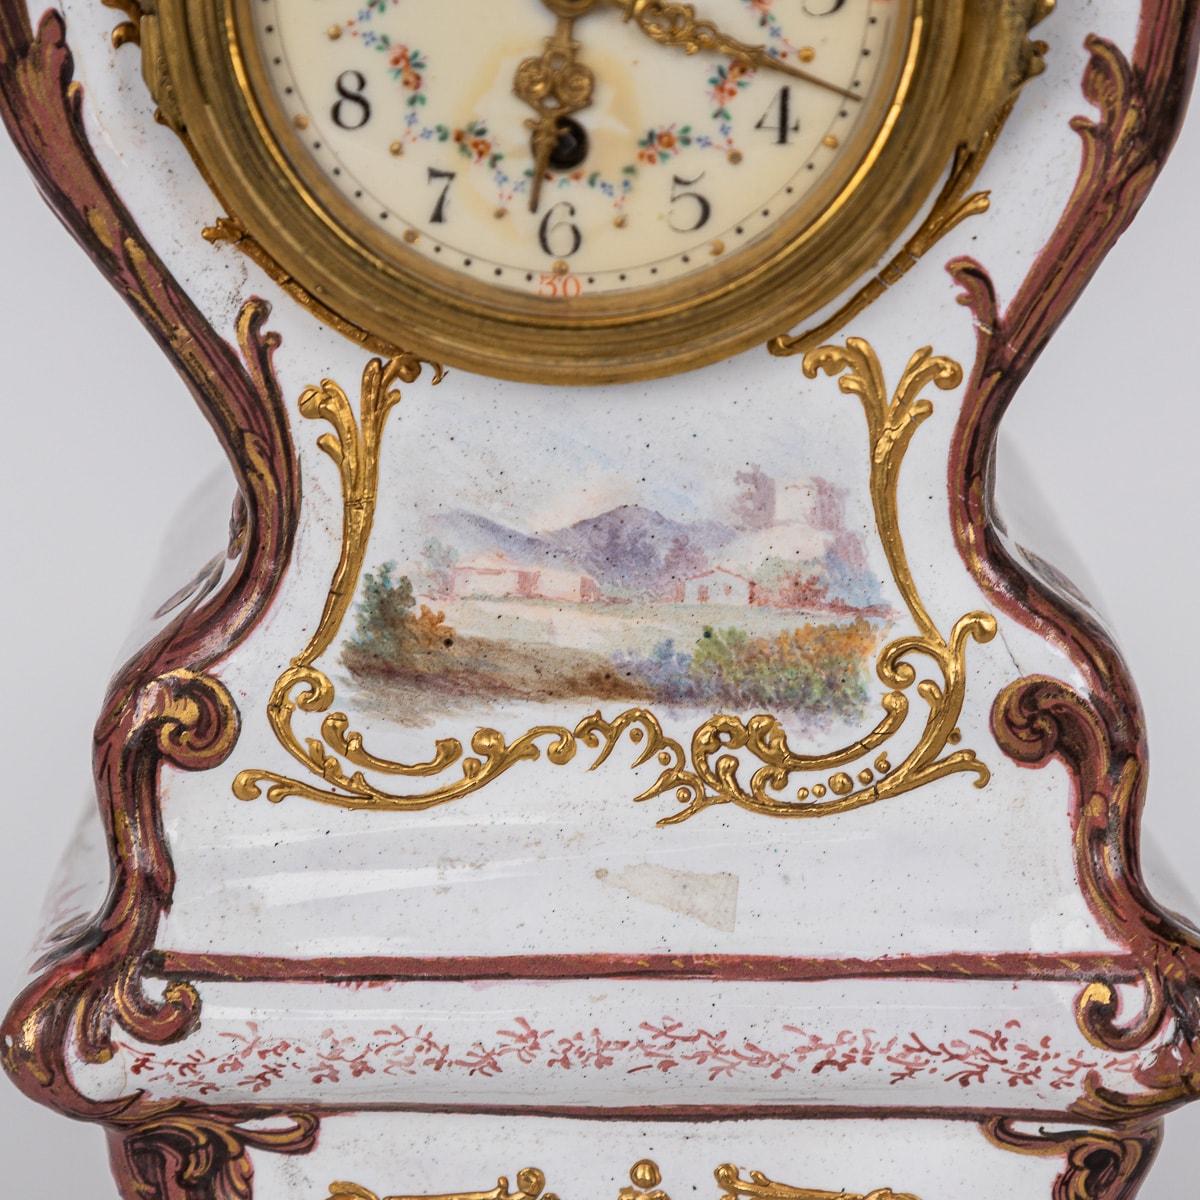 18th Century English Enamel Table Clock With Floral & Romantic Scenes c.1770 For Sale 4